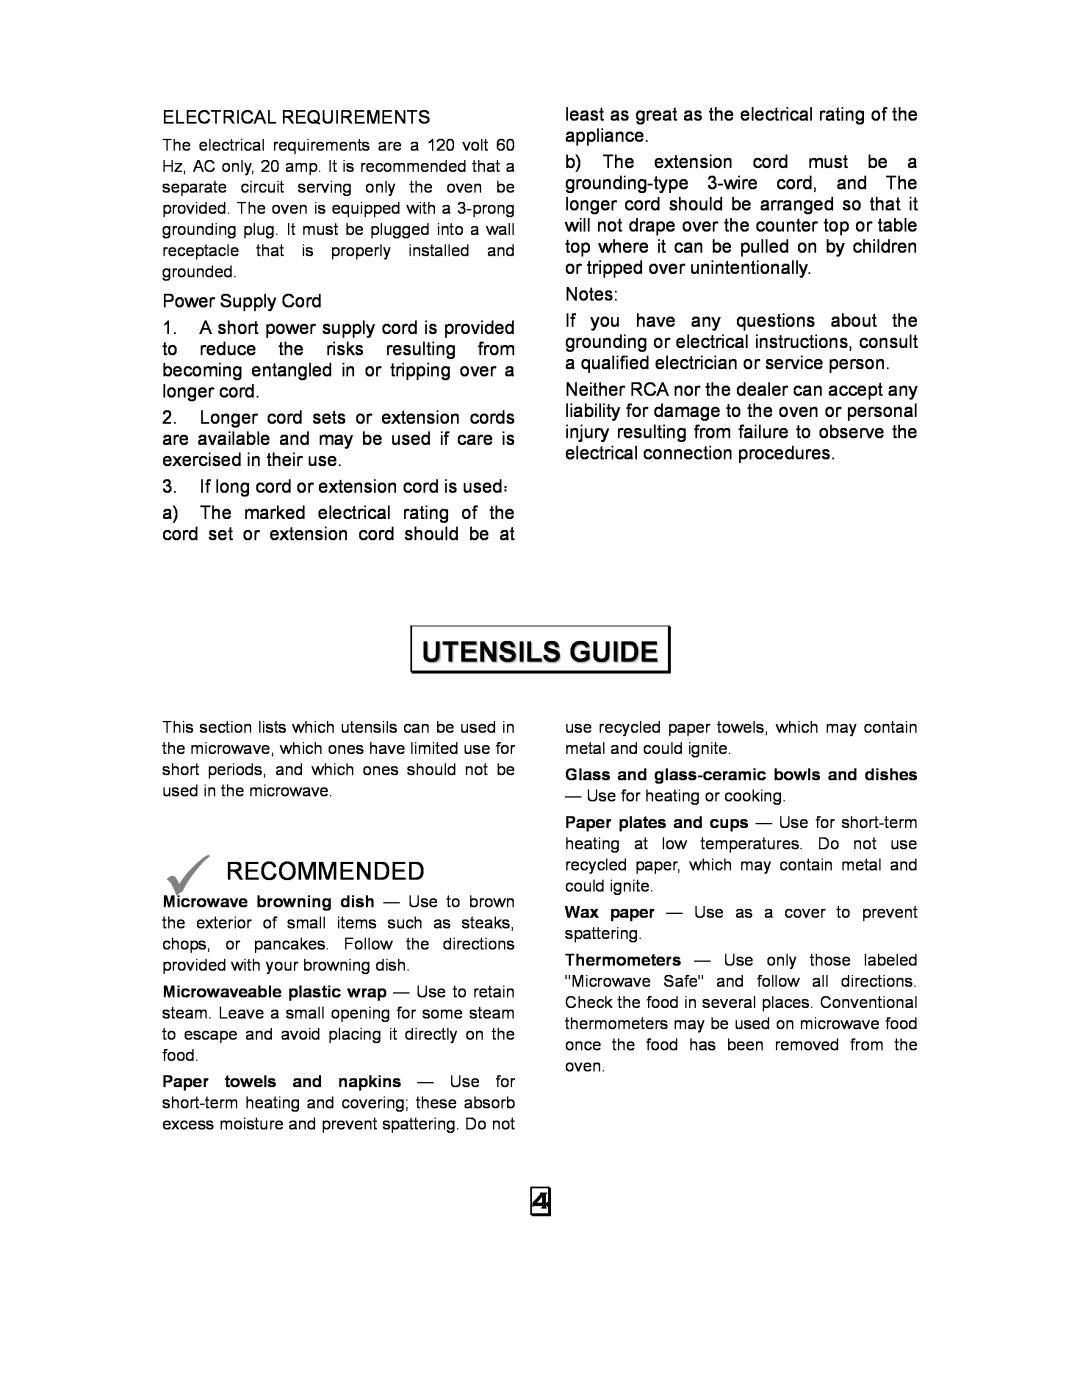 RCA RMW968 manual Utensils Guide, Recommended 